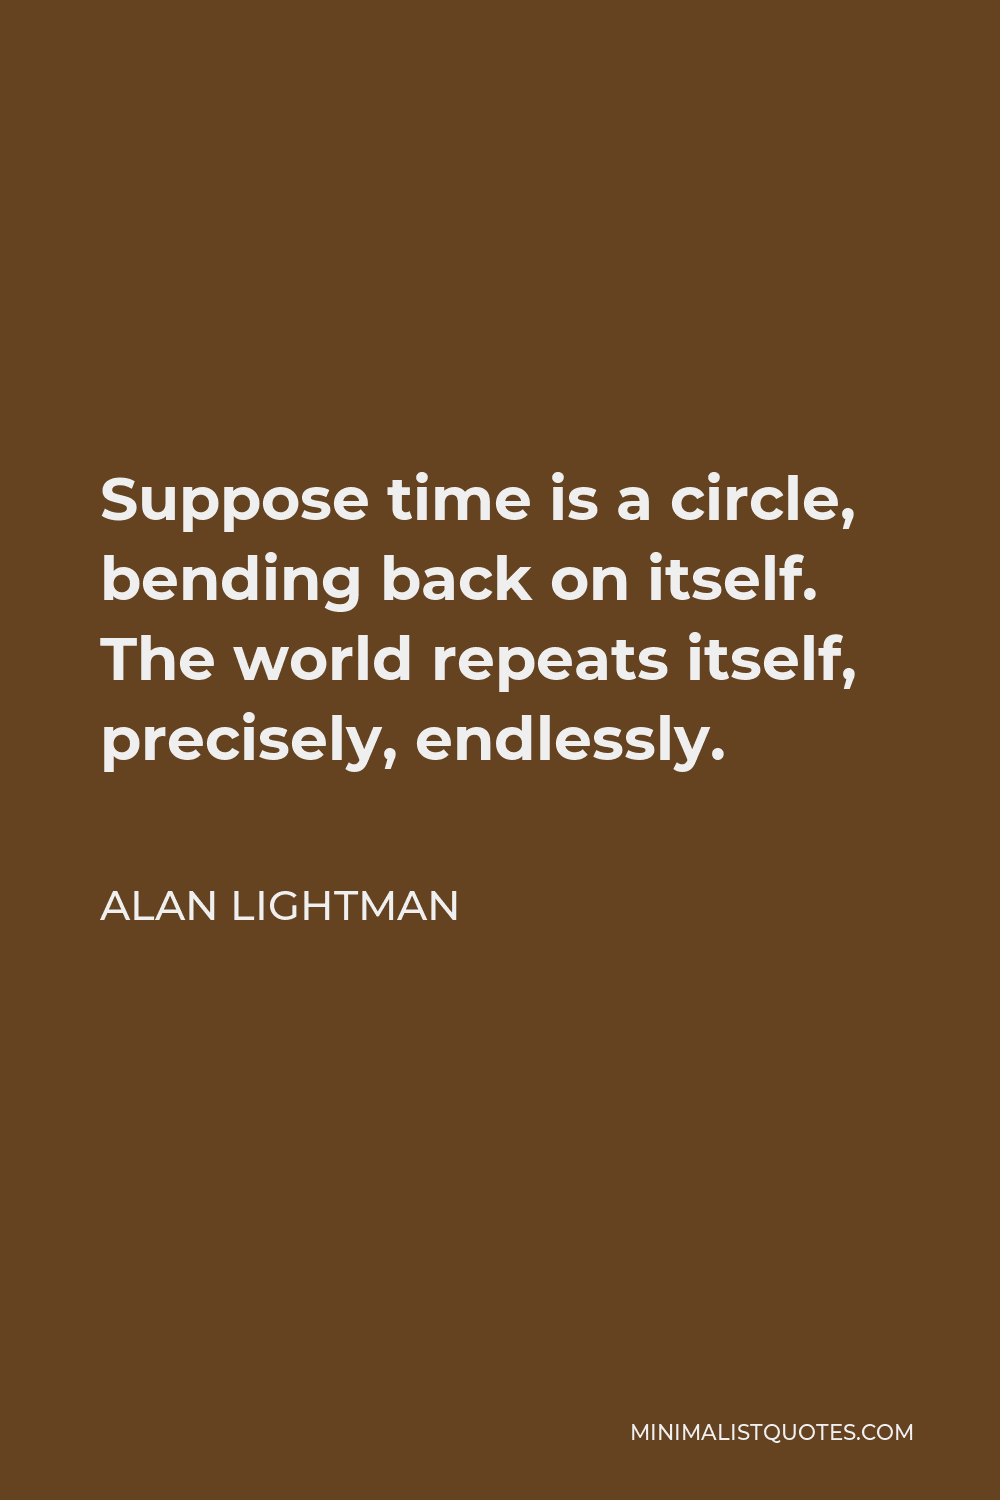 Alan Lightman Quote - Suppose time is a circle, bending back on itself. The world repeats itself, precisely, endlessly.